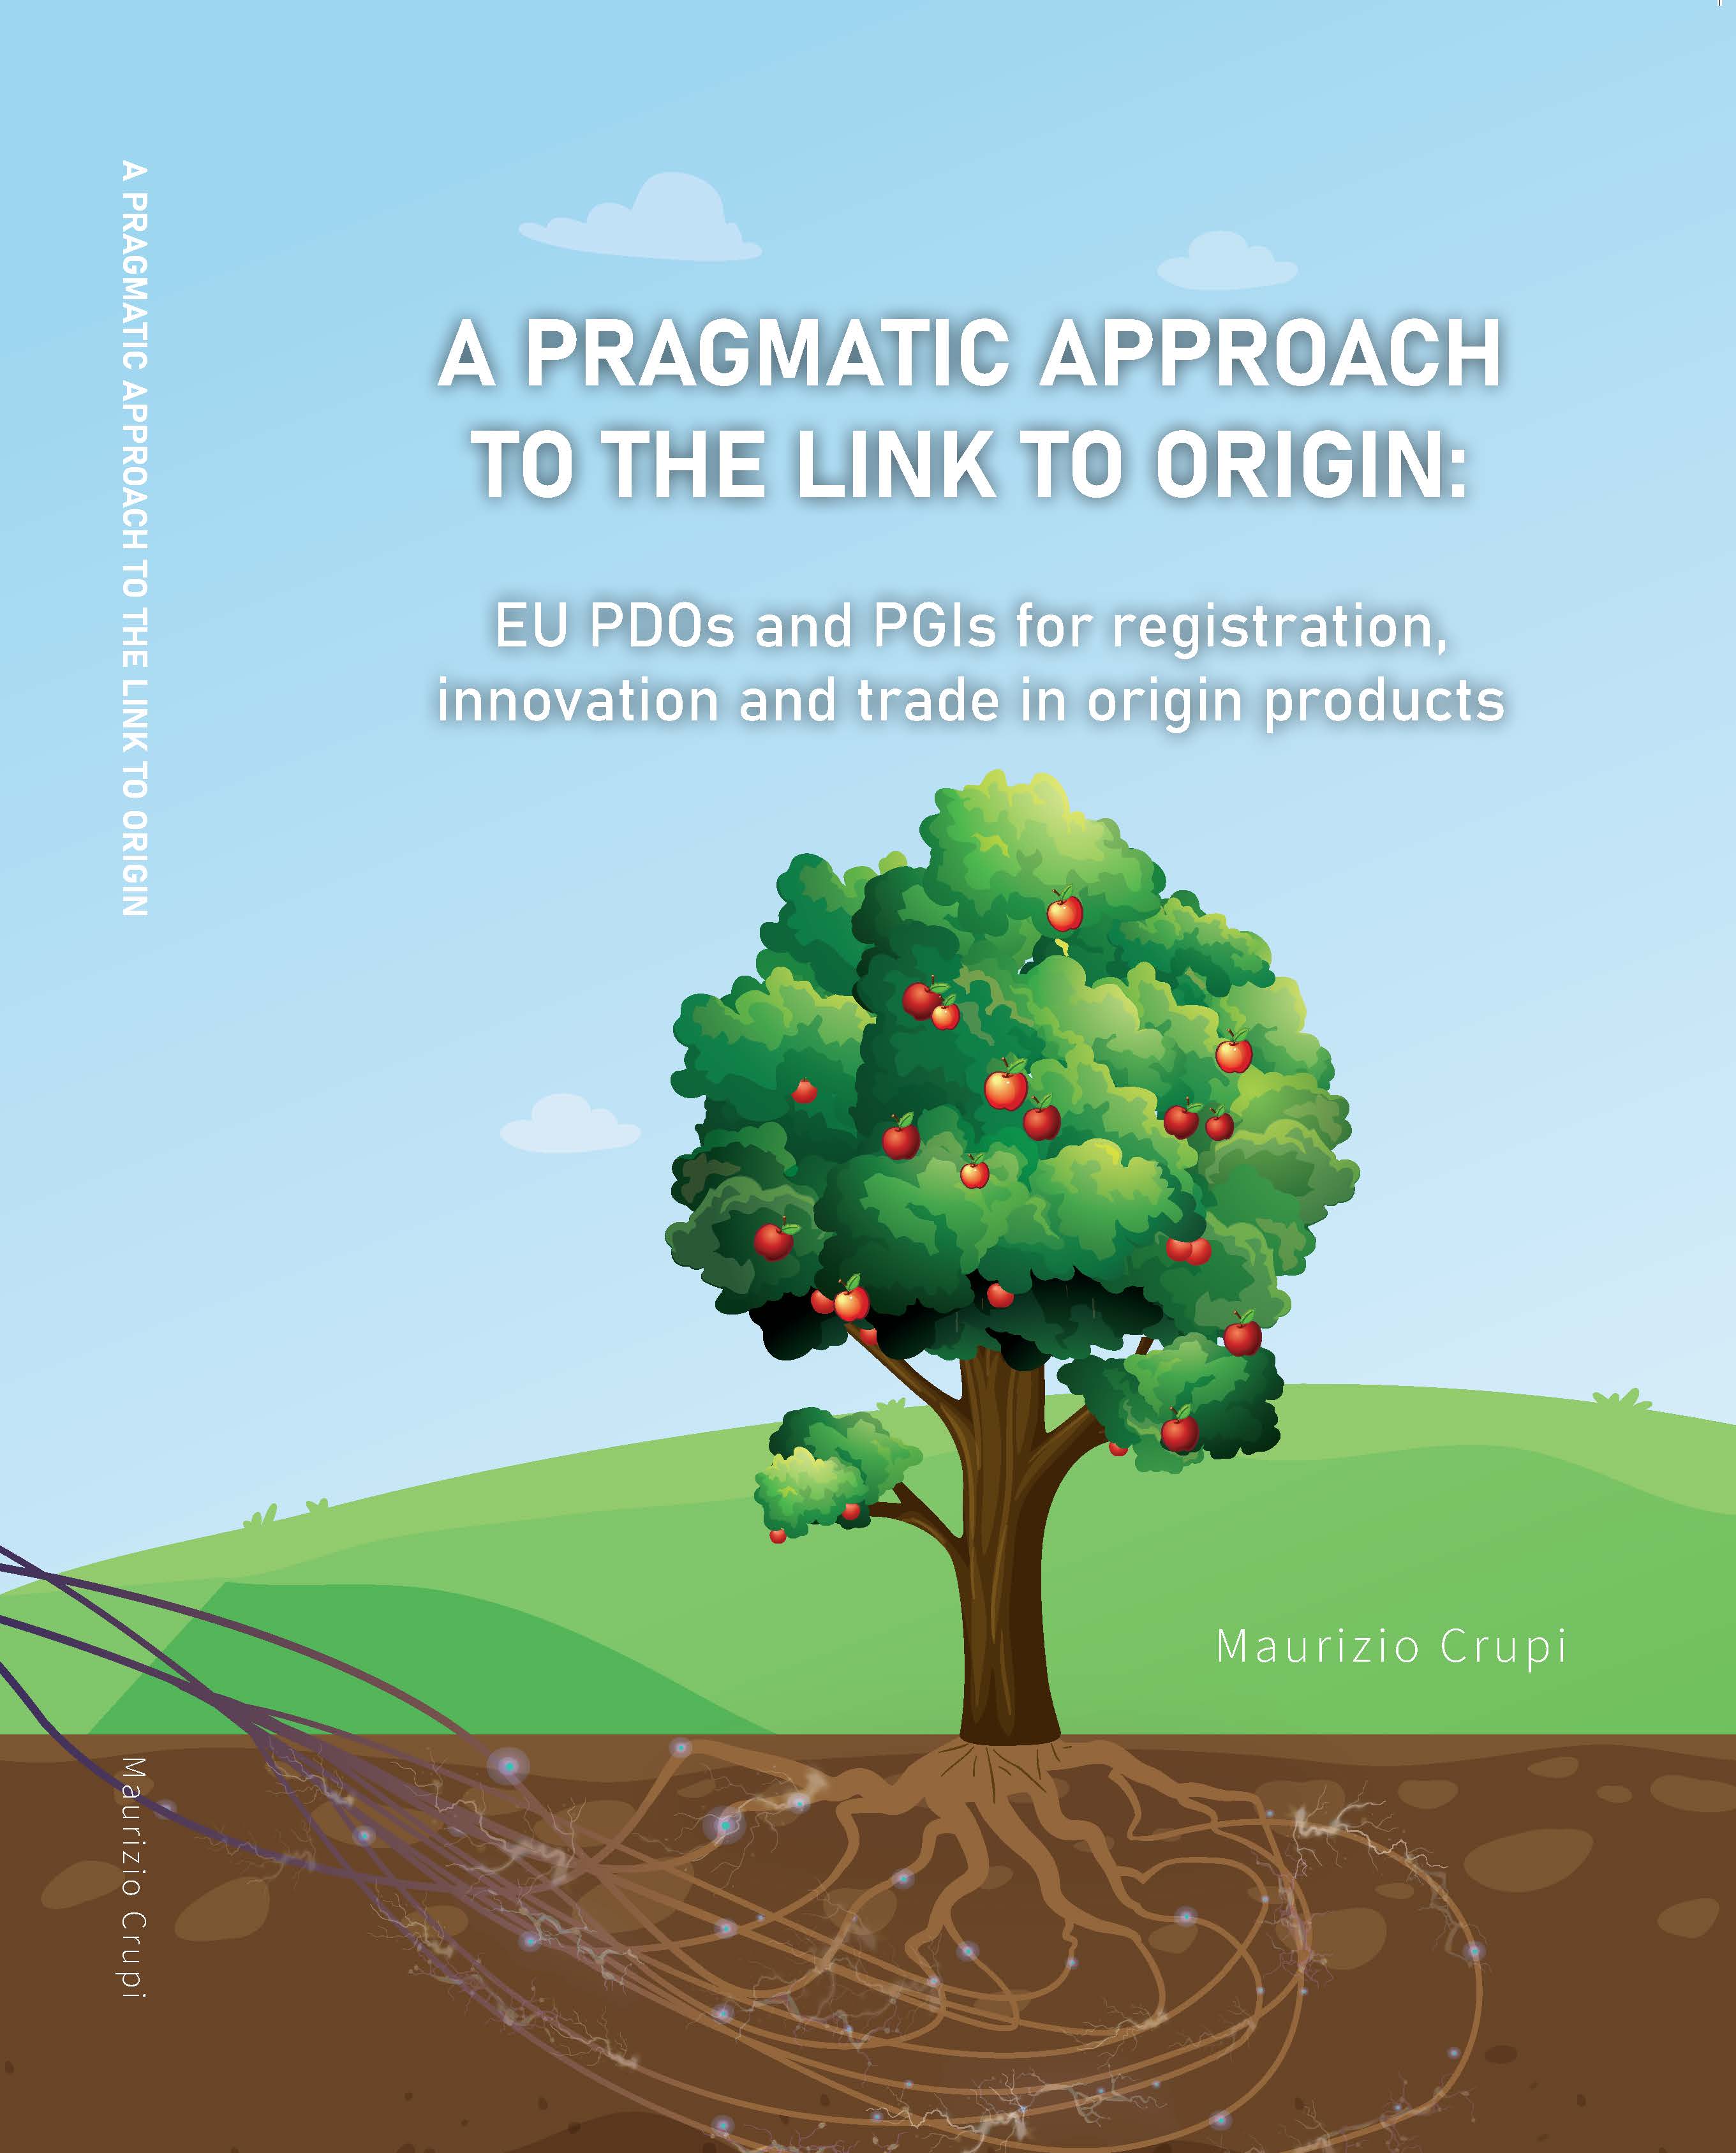 law_a_pragmatic_approach_to_the_link_to_origin